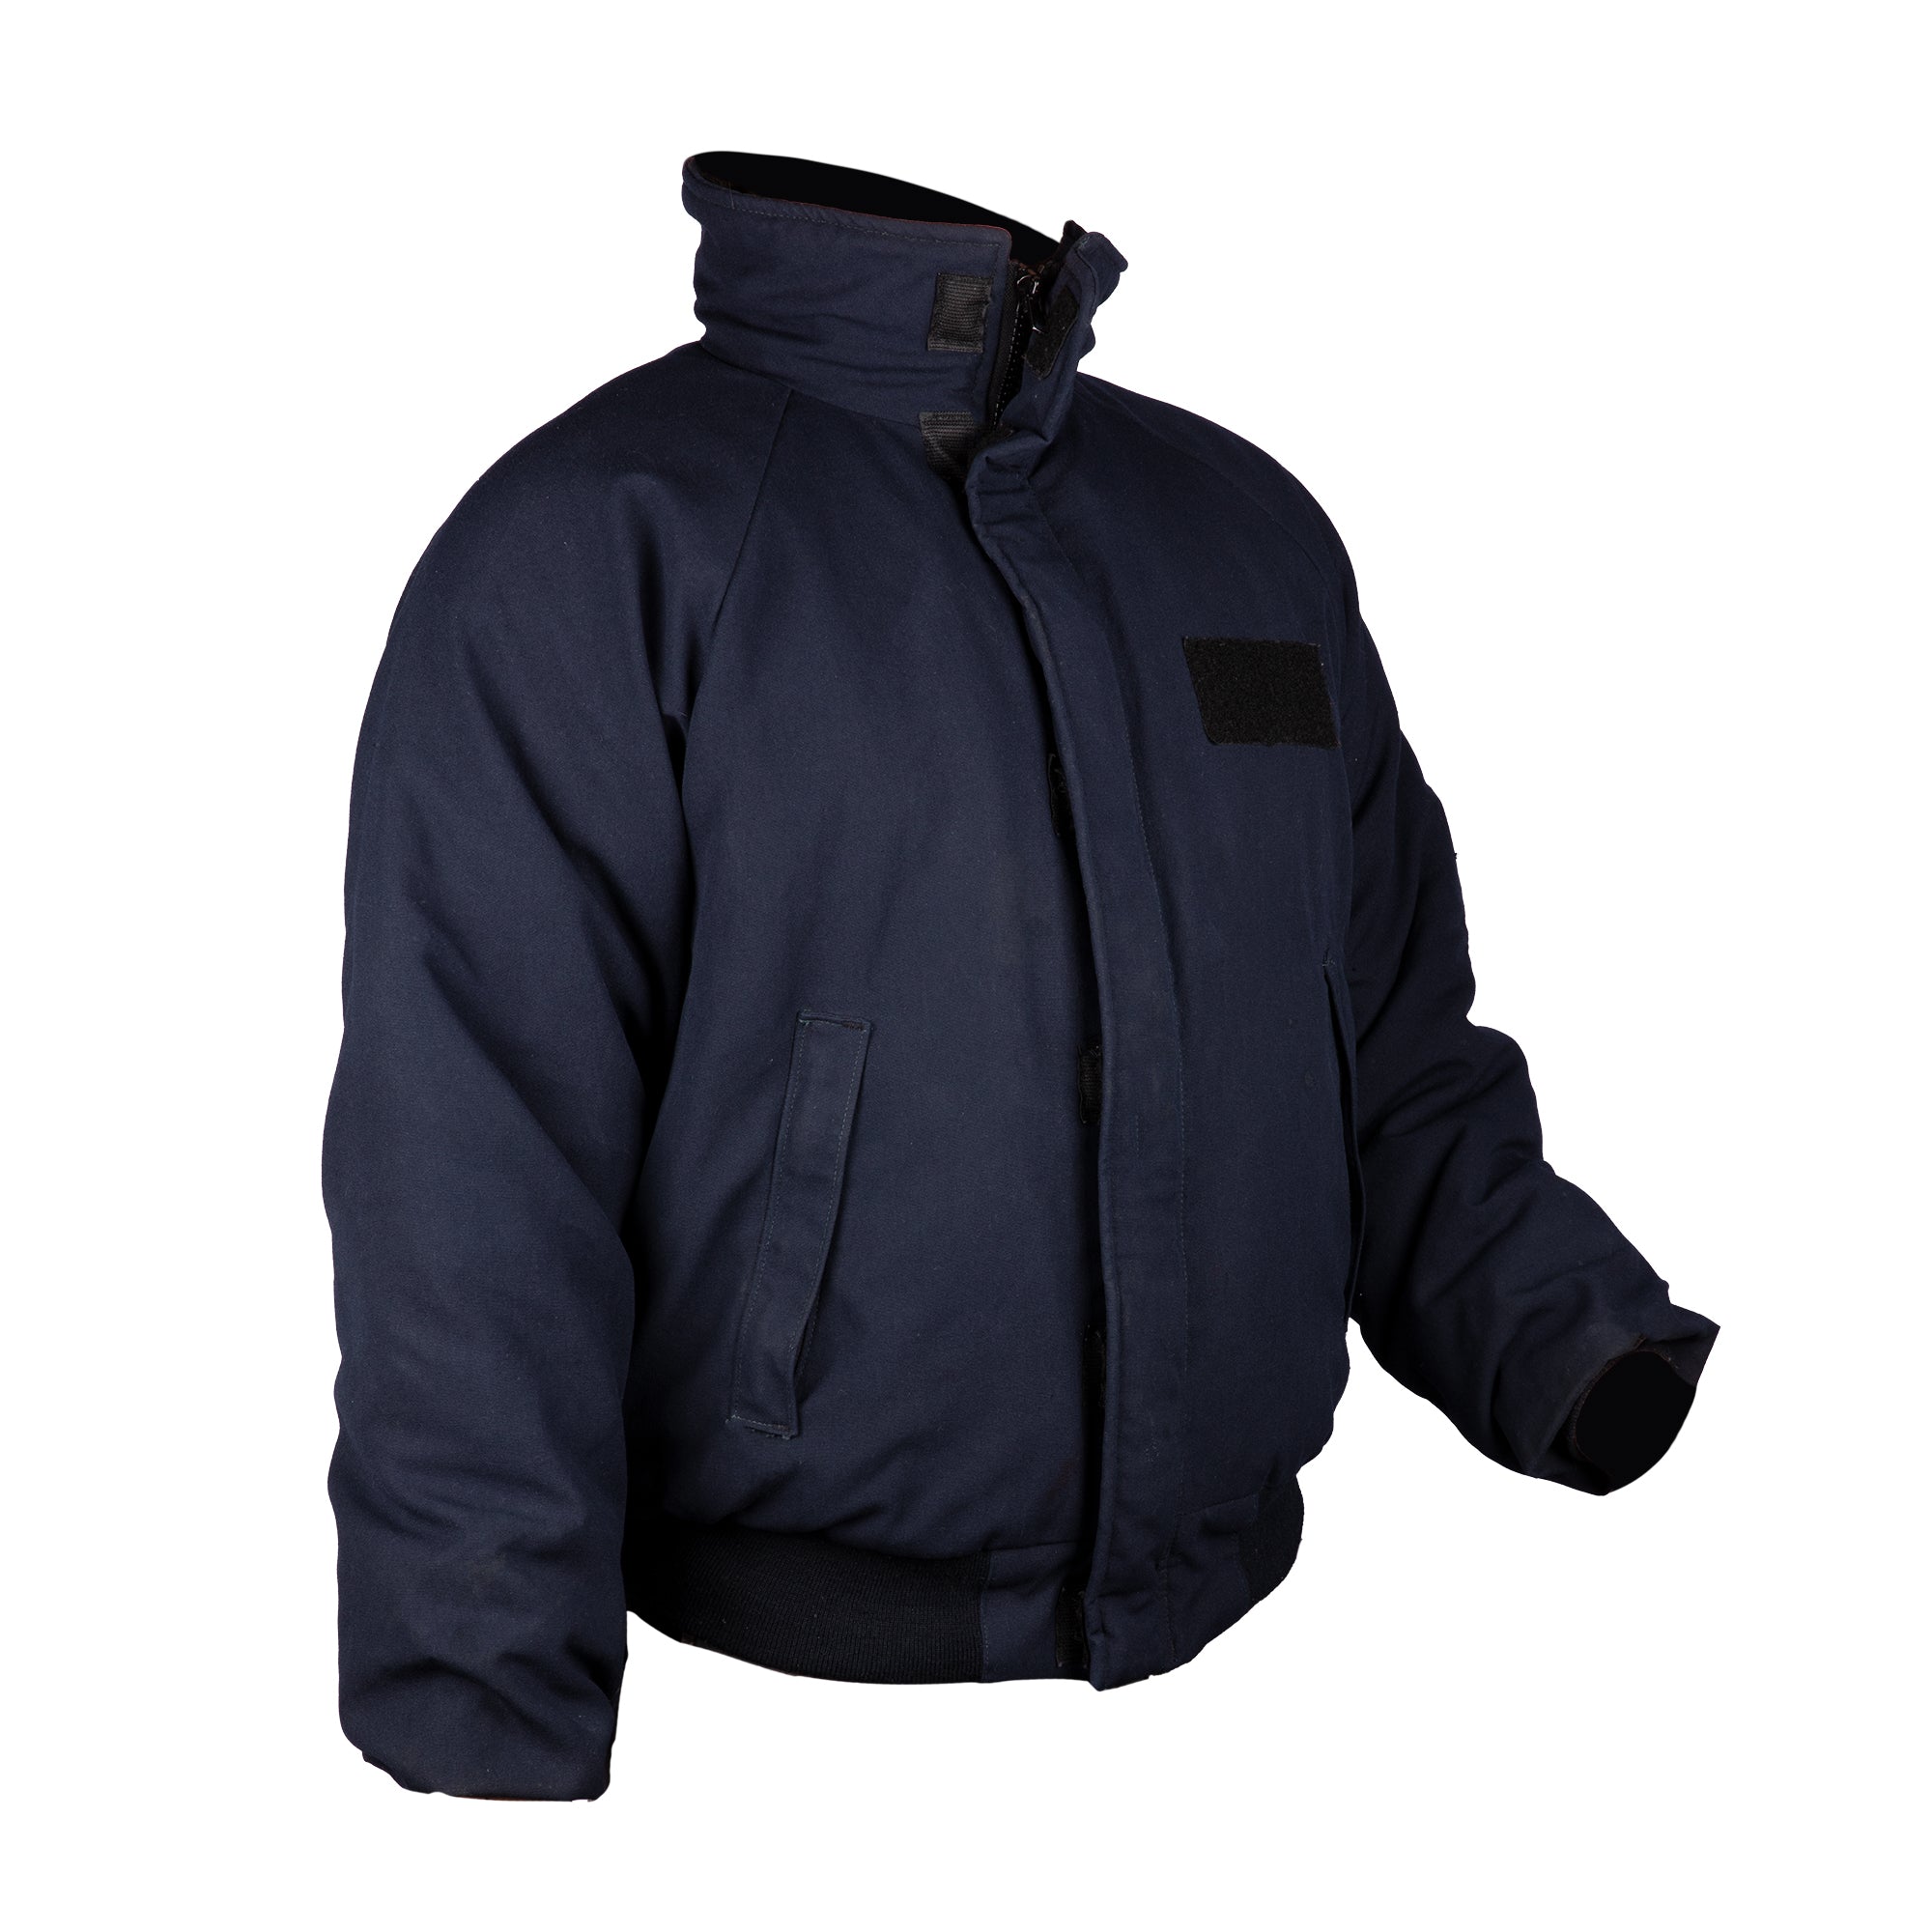 NAVY WATERPROOF COVERALLS WITH QUILTED LINER